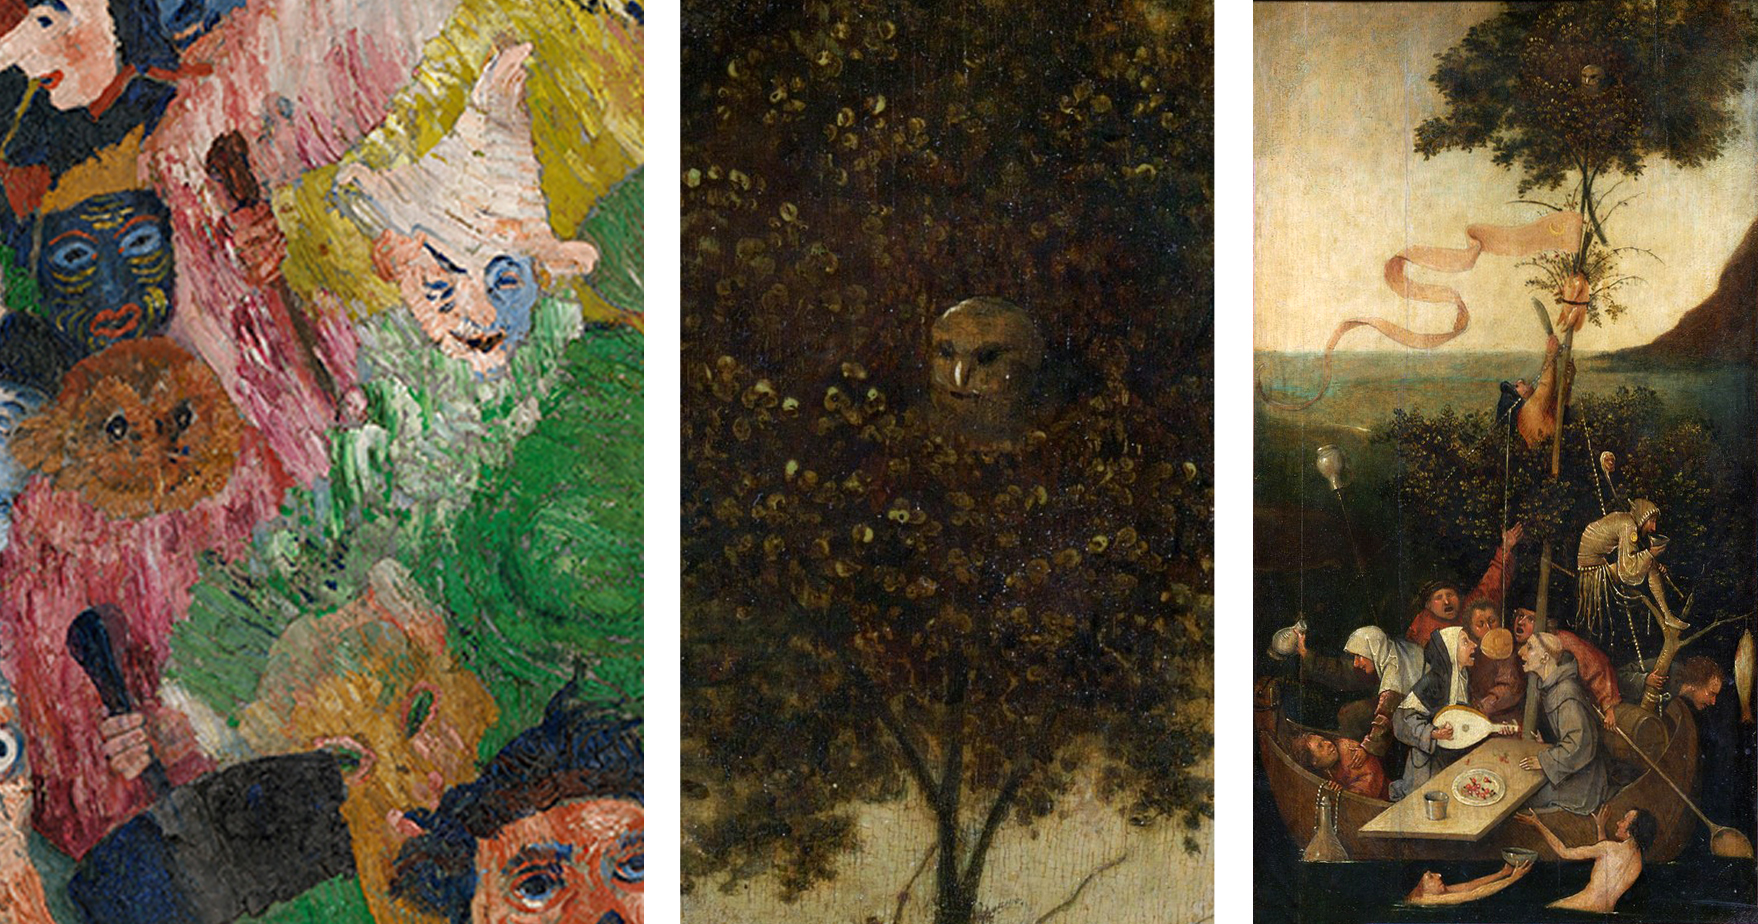 Left: Owl (detail), James Ensor, Christ’s Entry into Brussels in 1889, 1888, oil on canvas, 99 1/2 x 169 1/2 inches (J. Paul Getty Museum, Los Angeles); Center: Owl (detail) Hieronymus Bosch, Ship of Fools, 1490-1500, oil on wood, 23 x 13 inches (Louvre, Paris) Right: Hieronymus Bosch, Ship of Fools, 1490-1500, oil on wood, 23 x 13 inches (Louvre, Paris)